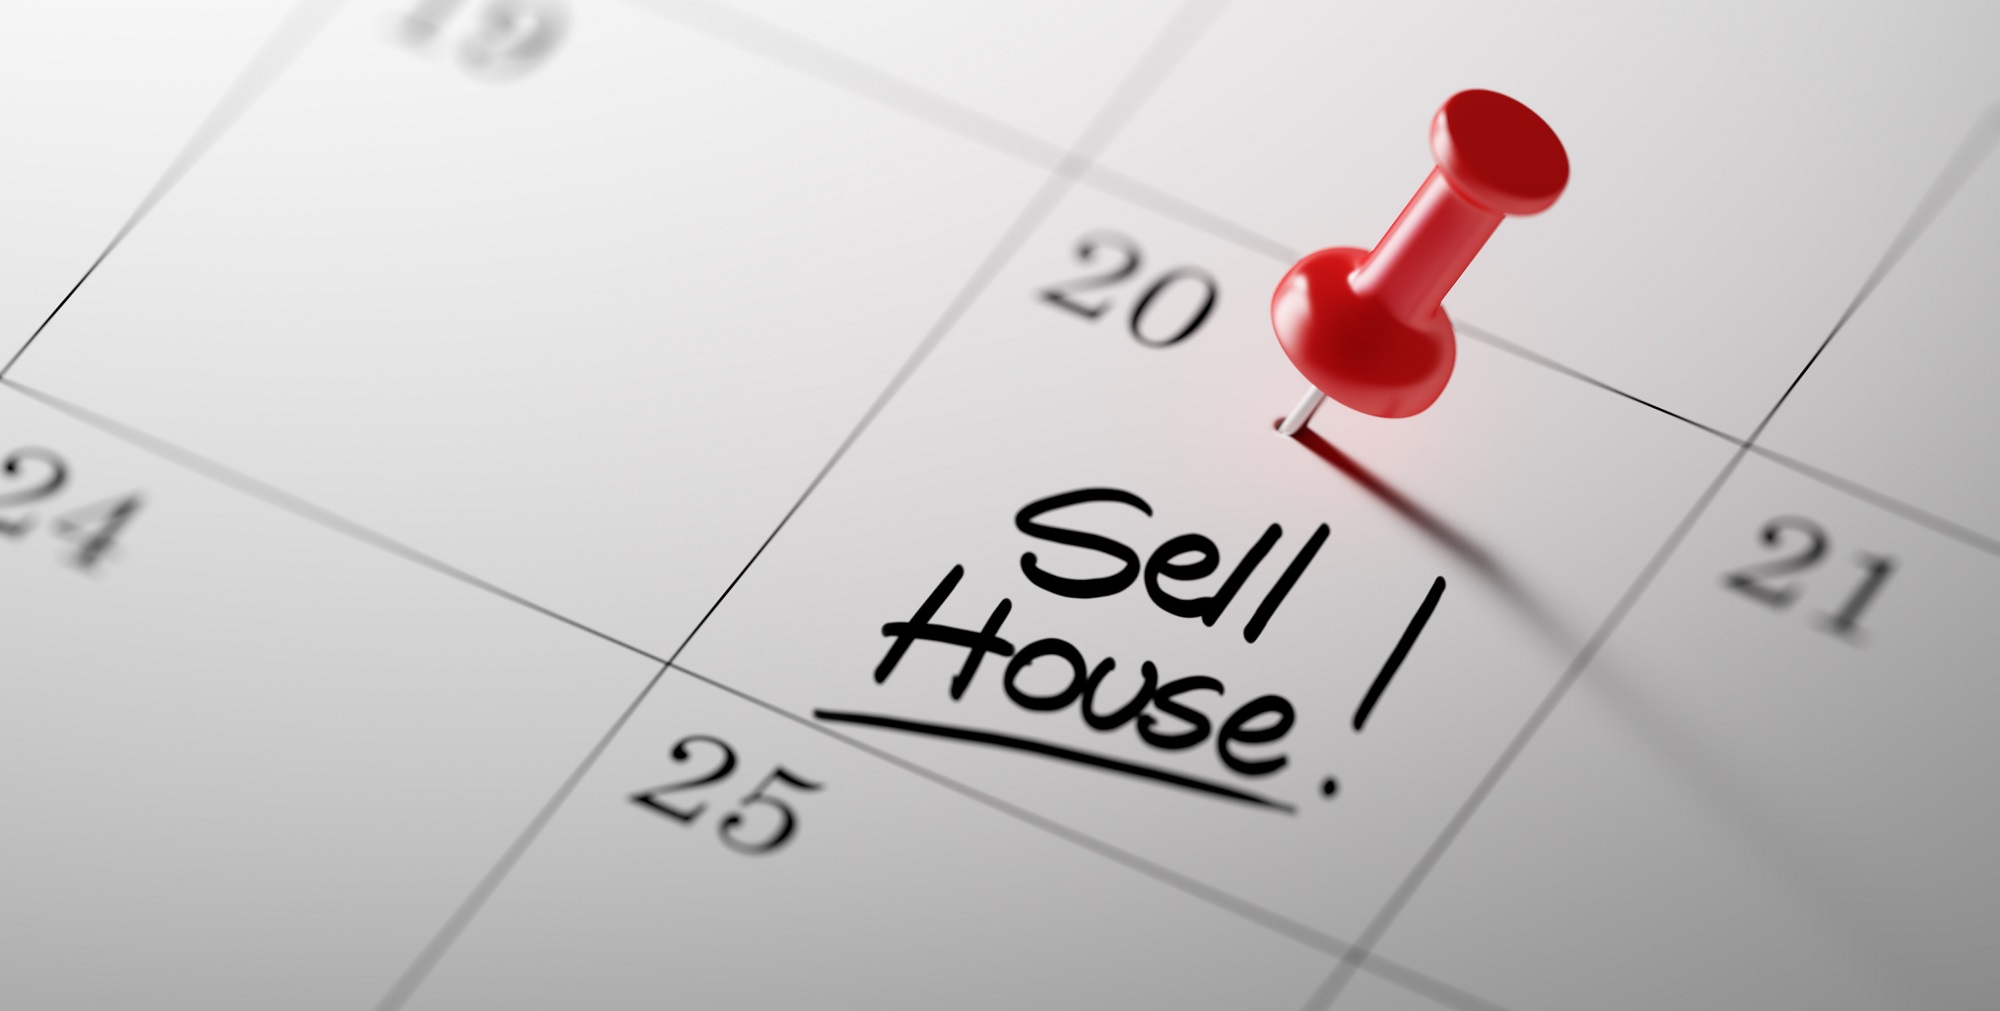 Selling a house: The process and steps to take when it's your first time